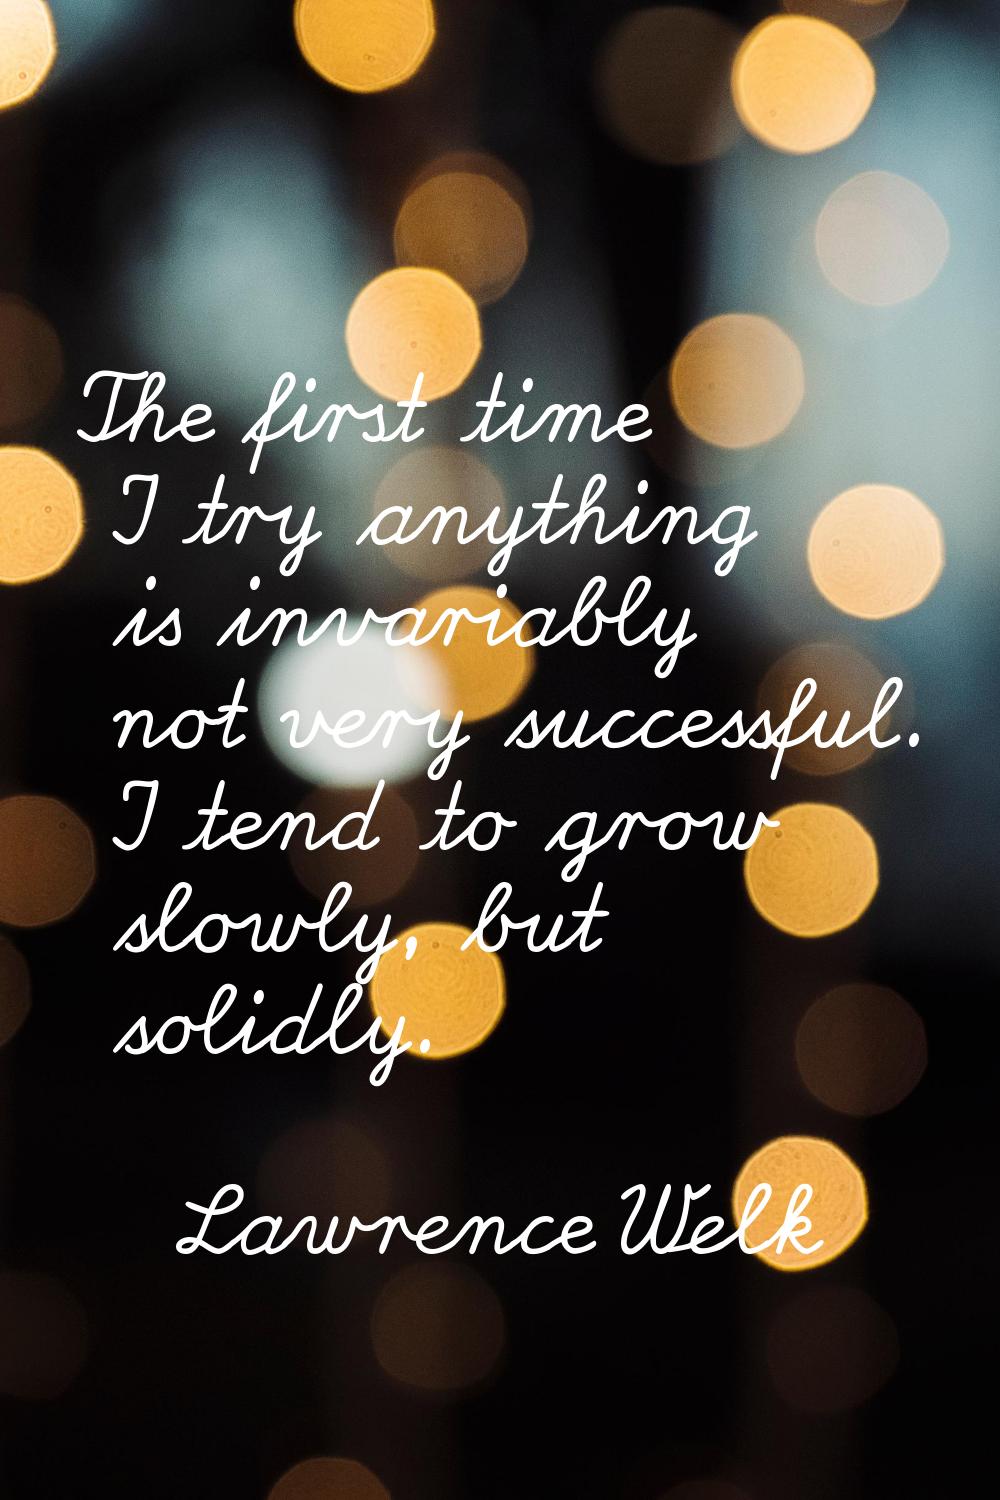 The first time I try anything is invariably not very successful. I tend to grow slowly, but solidly